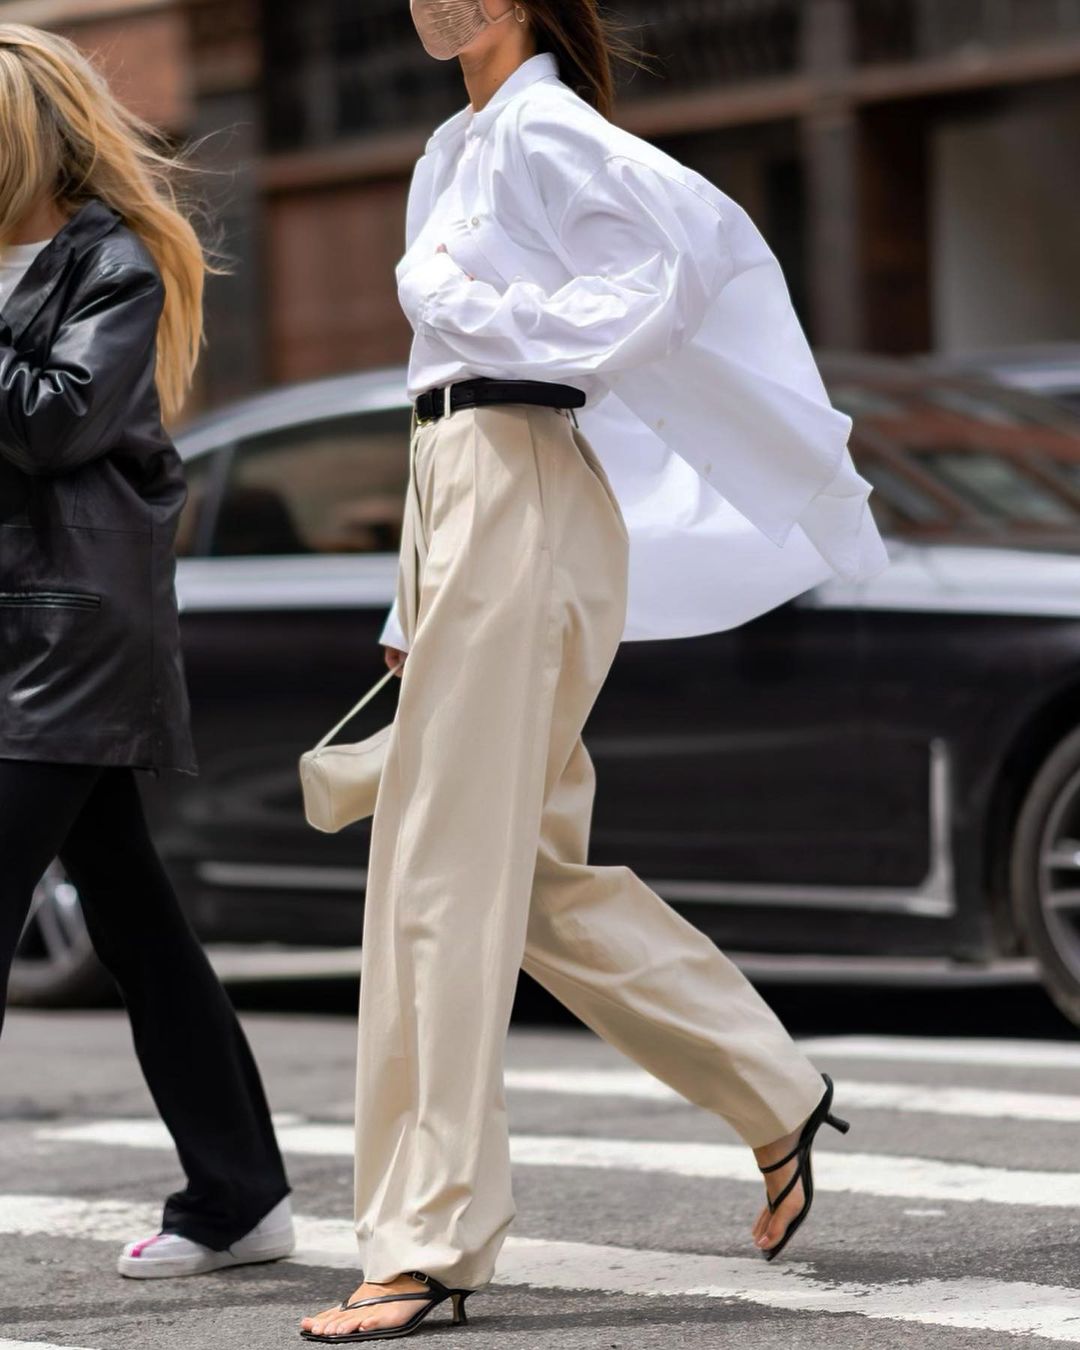 In Fashion | Style Inspiration: The Chicest Spring Outfit this Year